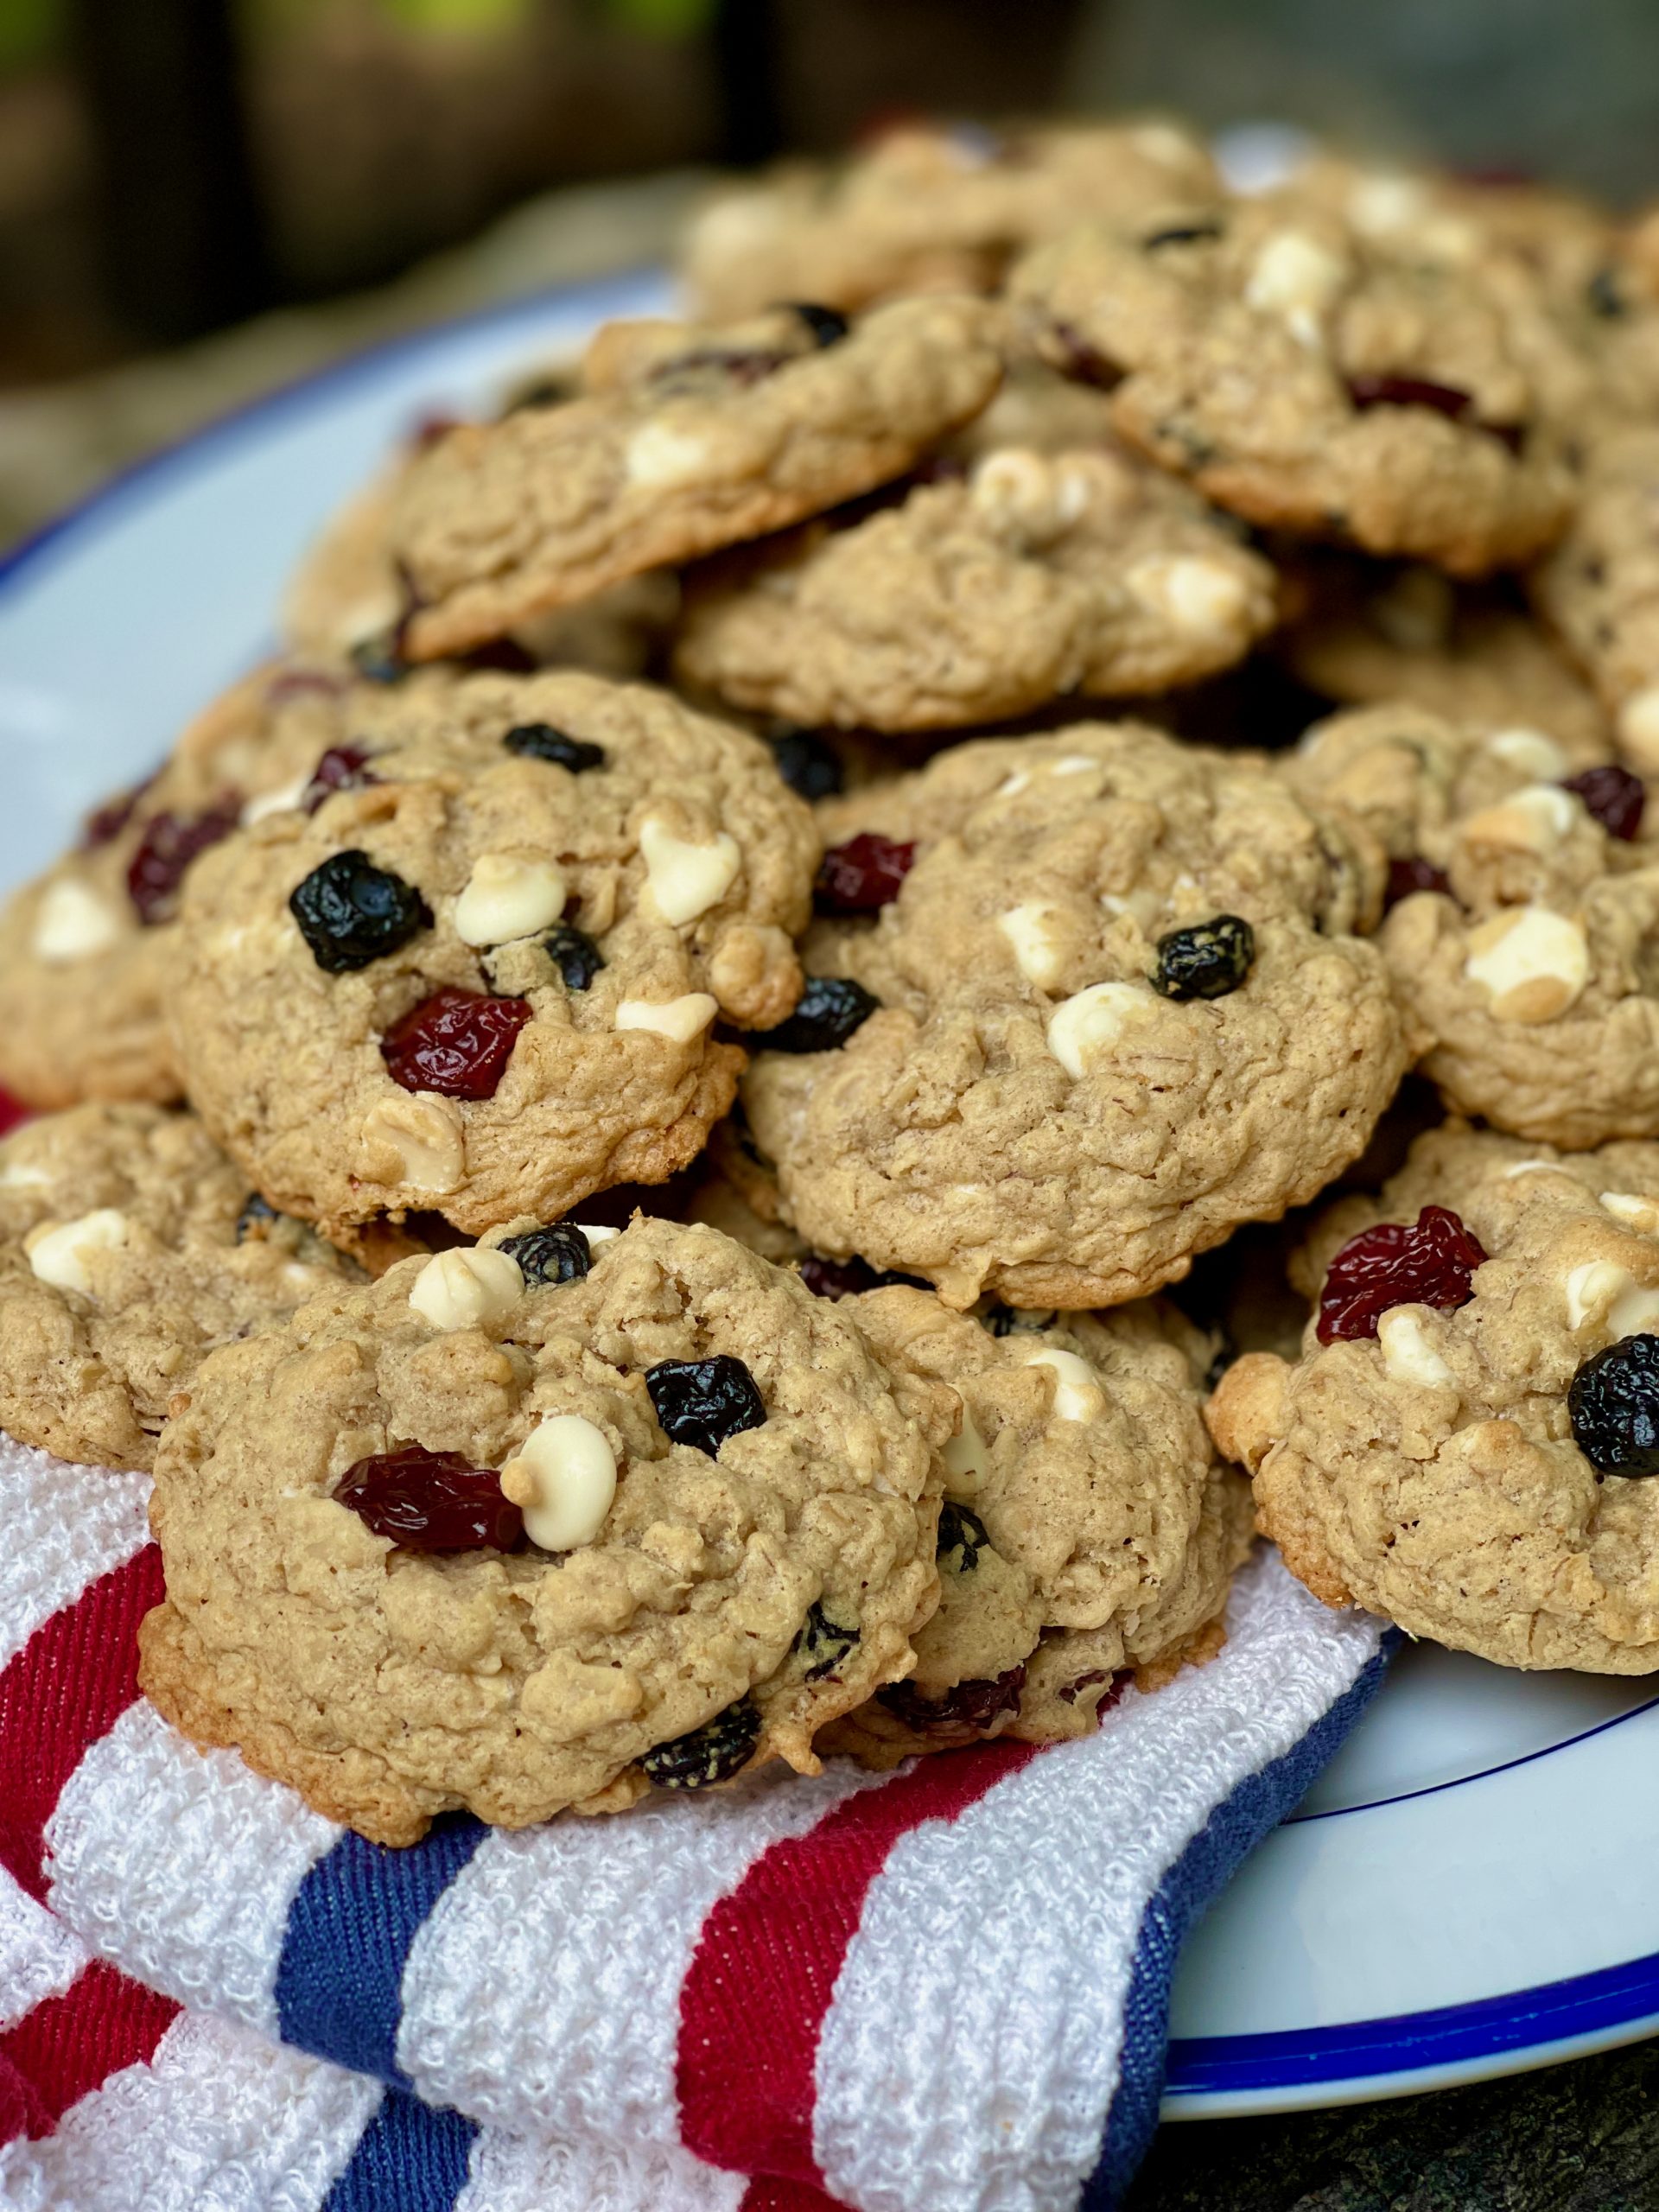 https://www.epicuricloud.com/wp-content/uploads/2021/07/Cherry-Berry-Oatmeal-Cookie-platter-scaled.jpeg